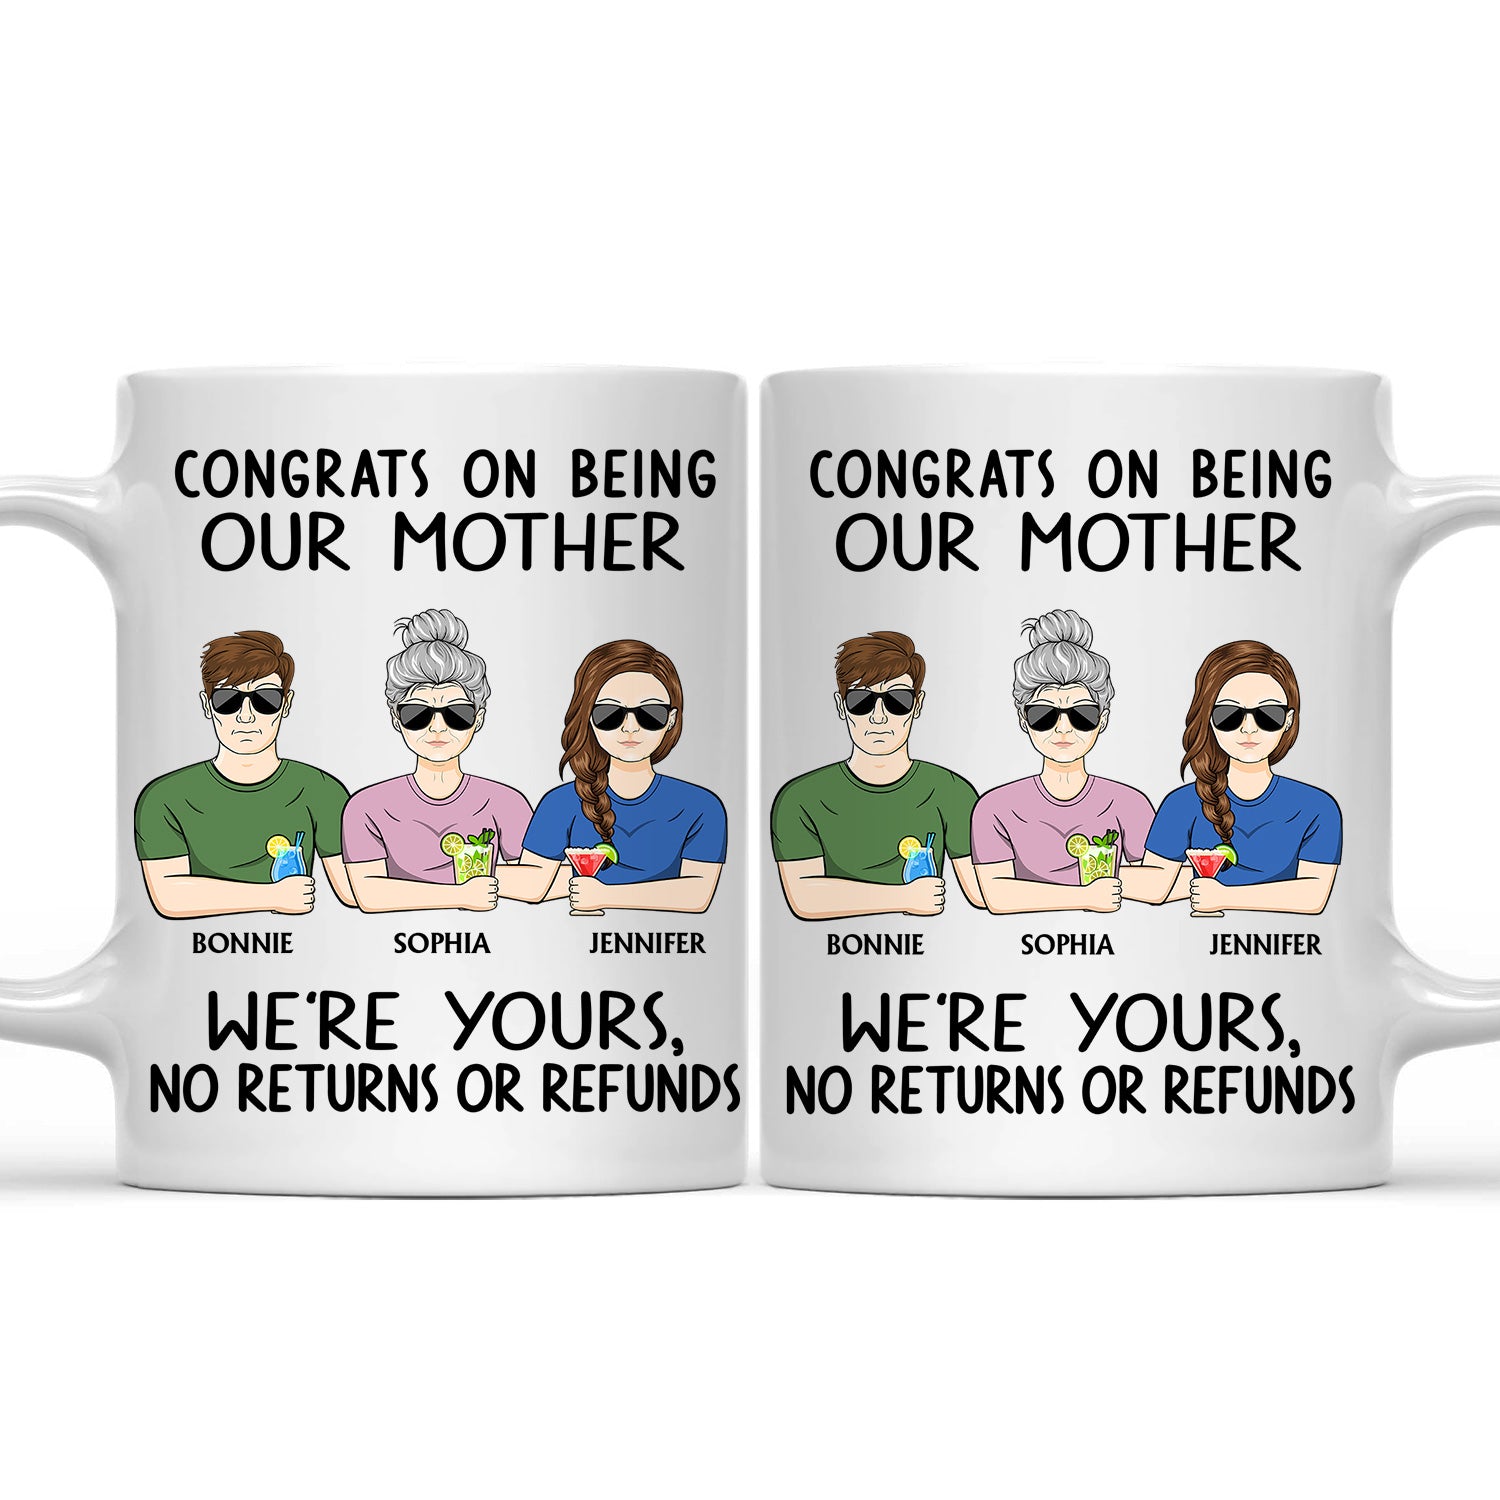 Congrats On Being Our Mother - Funny Gift For Mom, Mother, Grandma - Personalized Mug